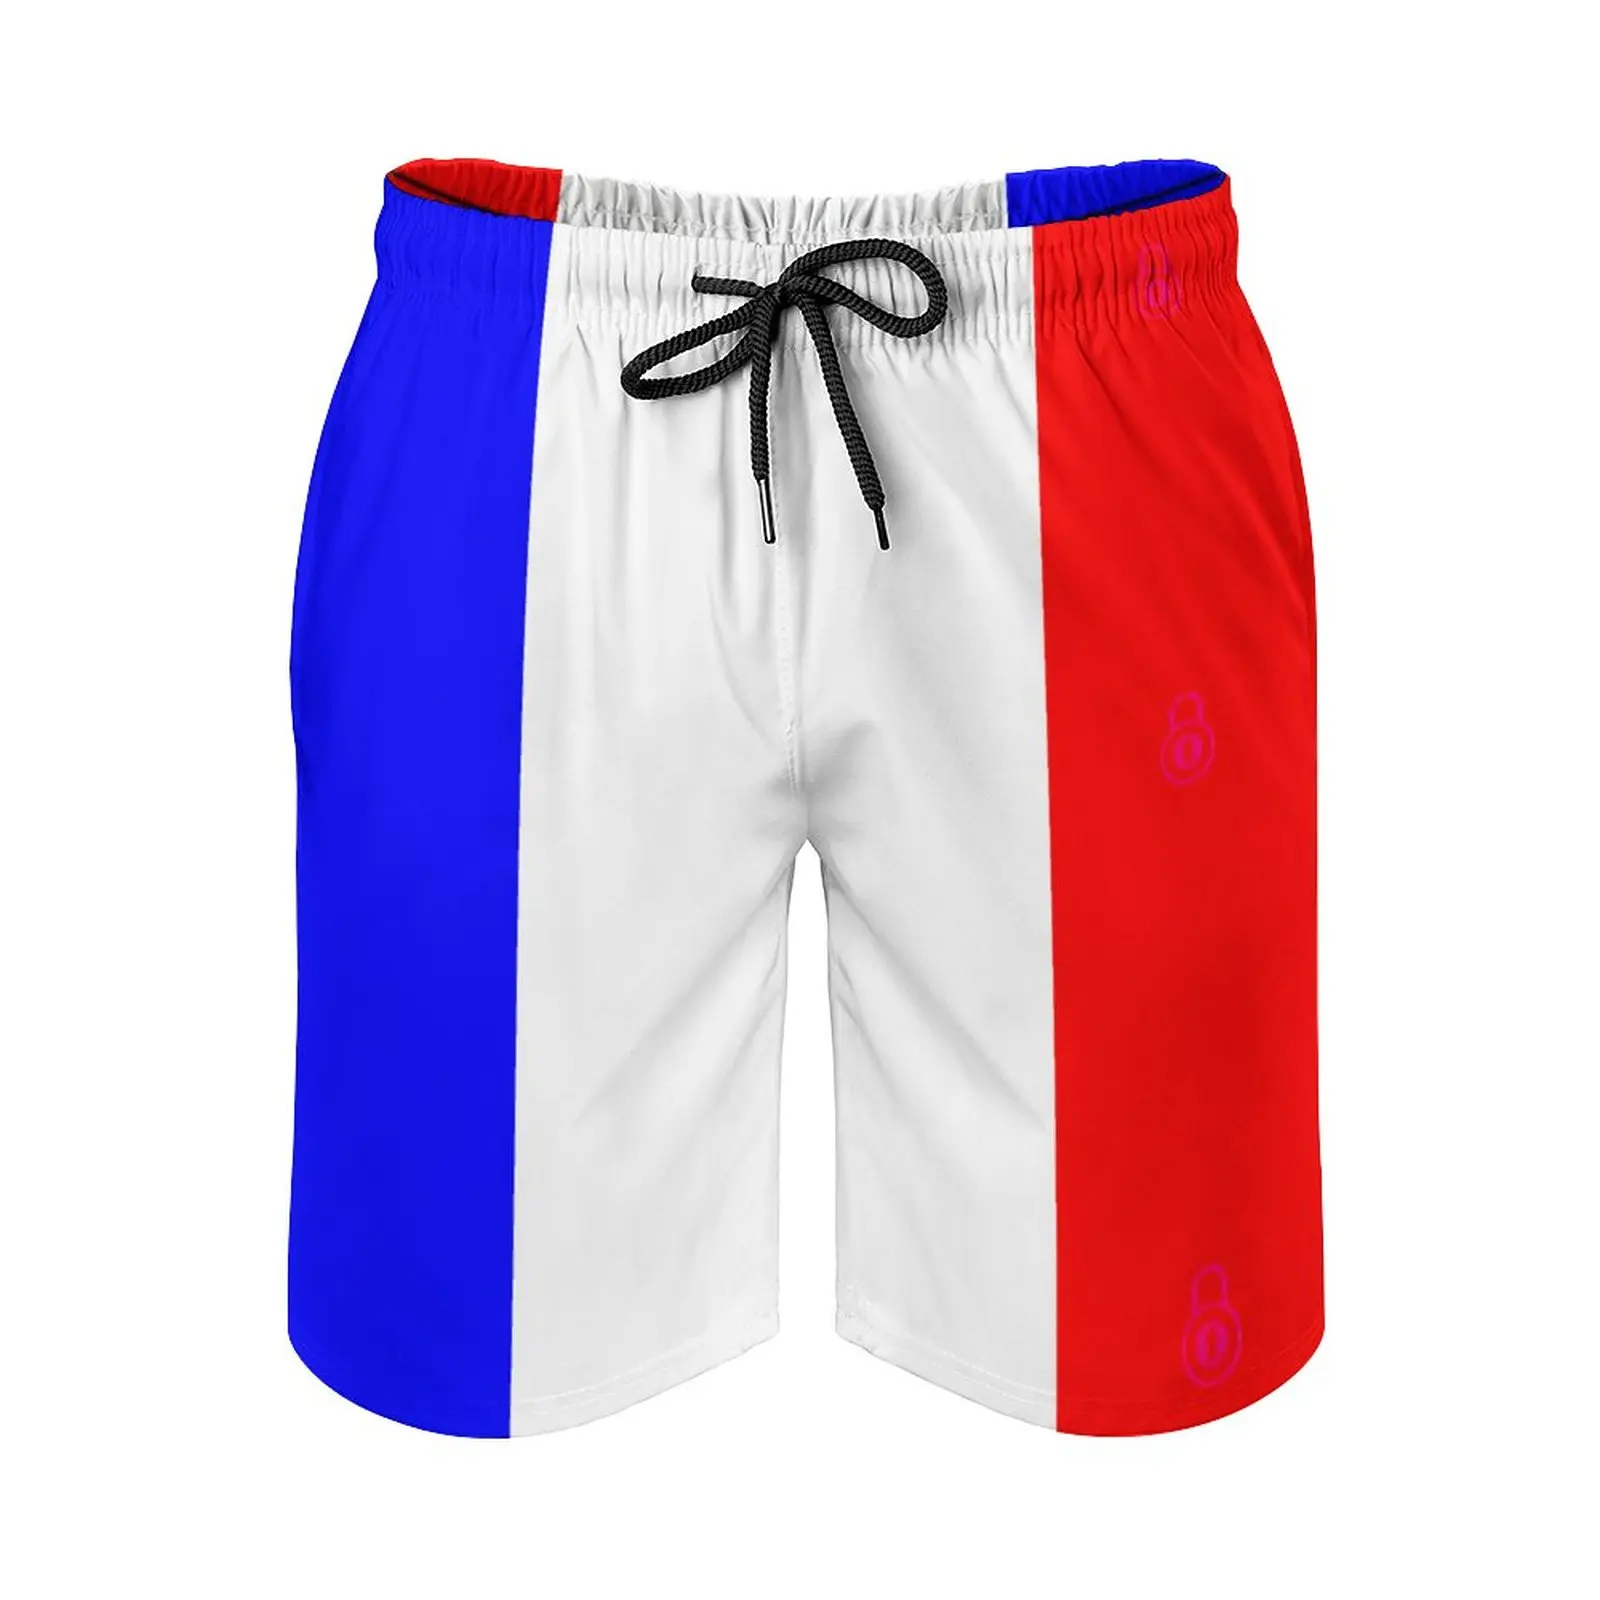 

France Flag Flag Of France Anime CausalGraphic Vintage Adjustable Drawstring Breathable Quick Dry Men's Beach ShortsSports Loose